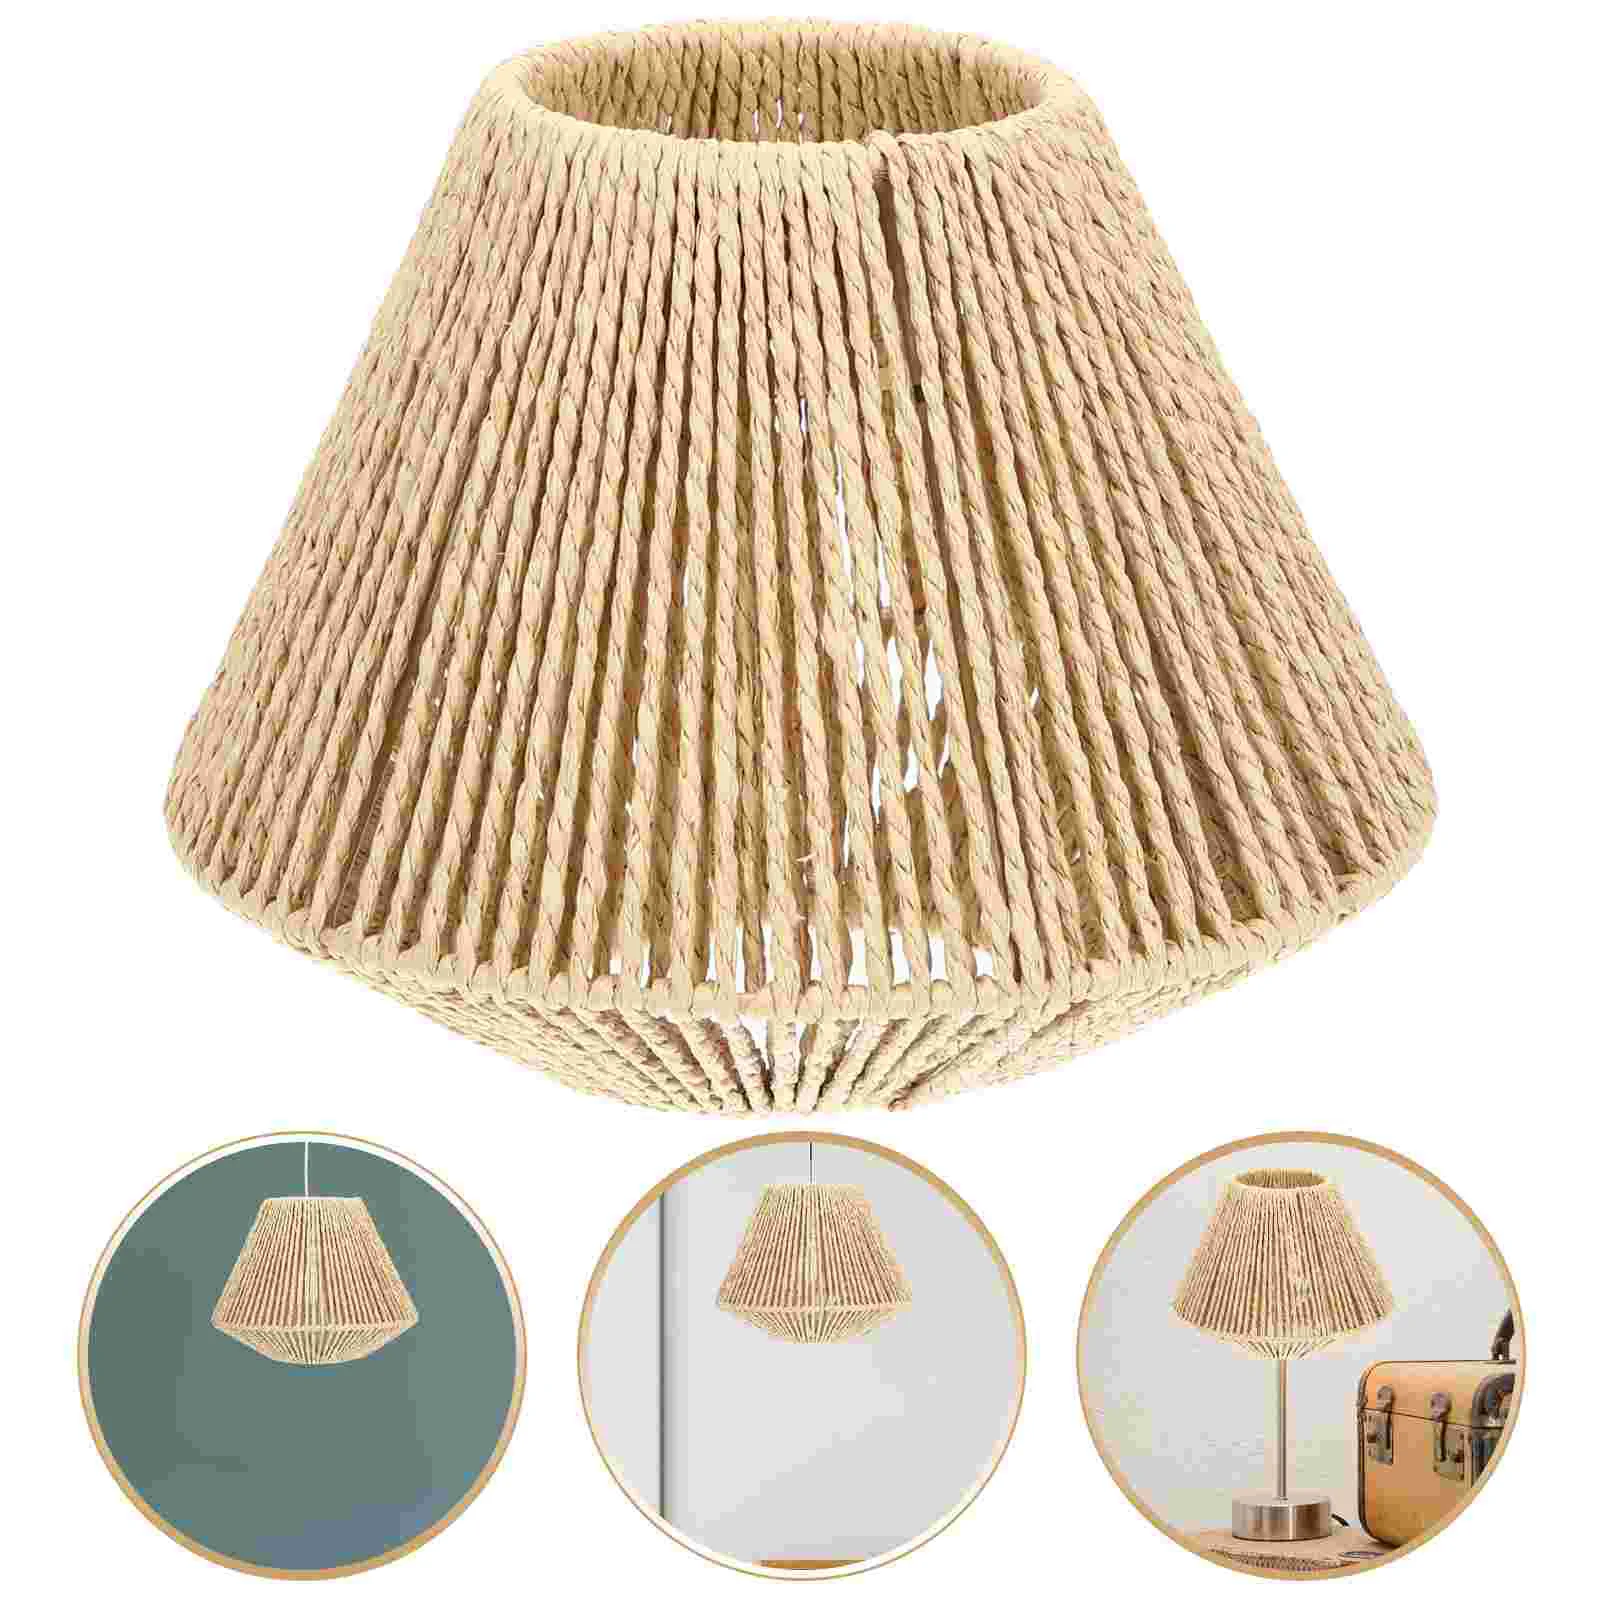 Straw Woven Lampshade Hanging Lamp Rustic Vintage Decor for Home Hotel Restaurant Braided Vintage Lampshade farmer rain cover handmade weave straw hat summer bamboo sunscreen steeple beach hat outdoor stage performance props lampshade